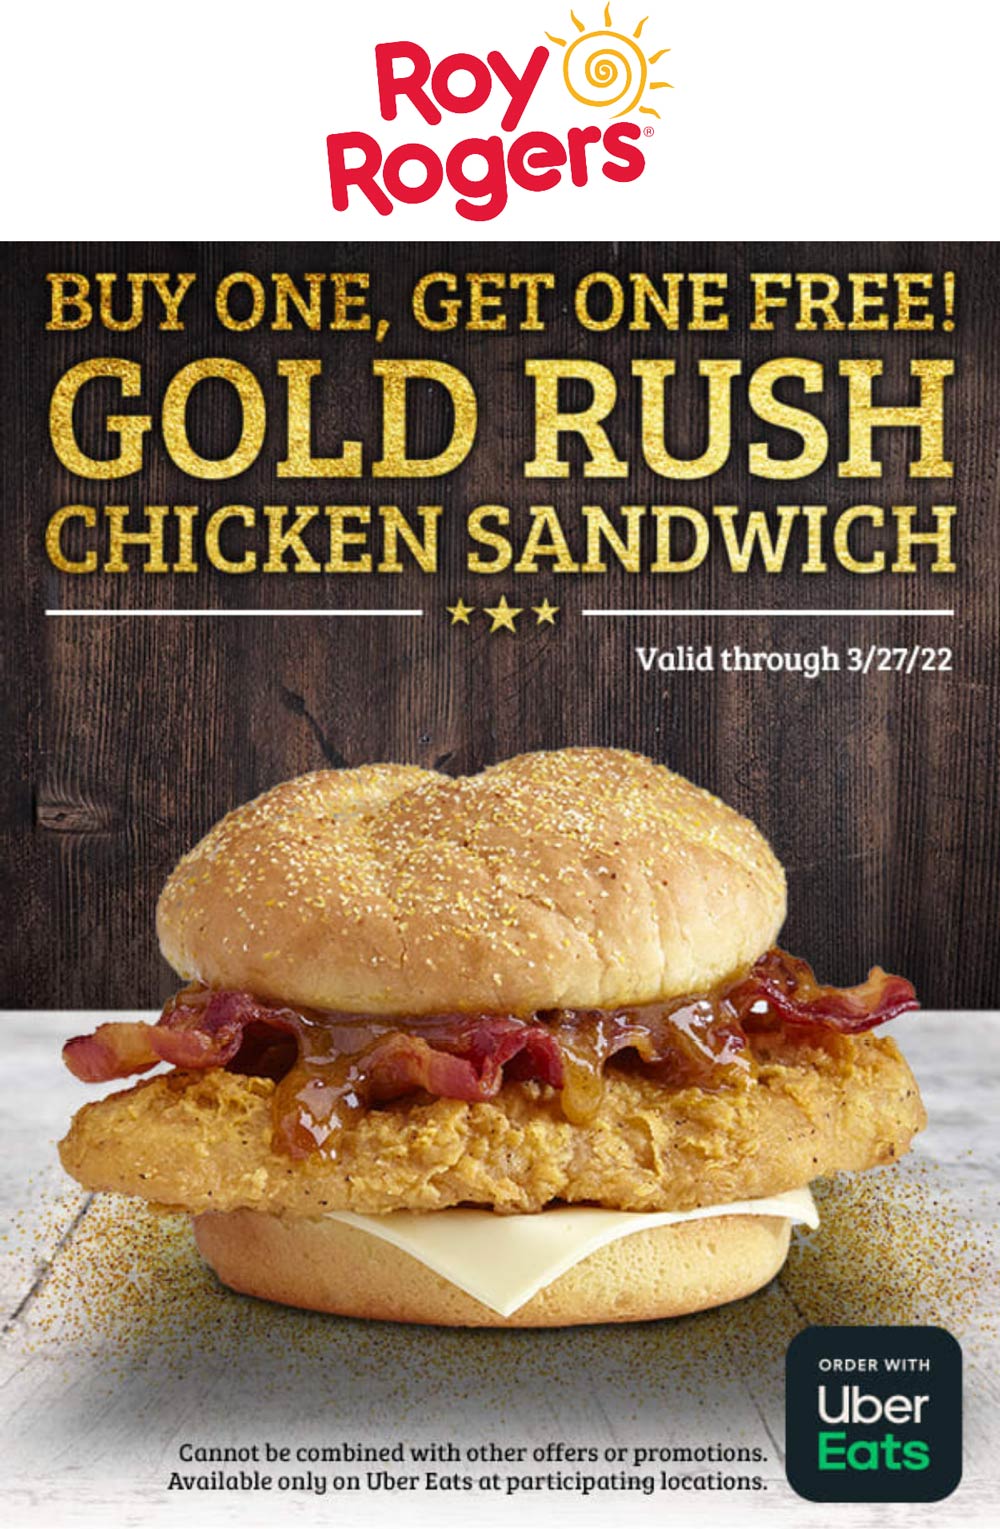 Roy Rogers restaurants Coupon  Second chicken sandwich free at Roy Rogers #royrogers 